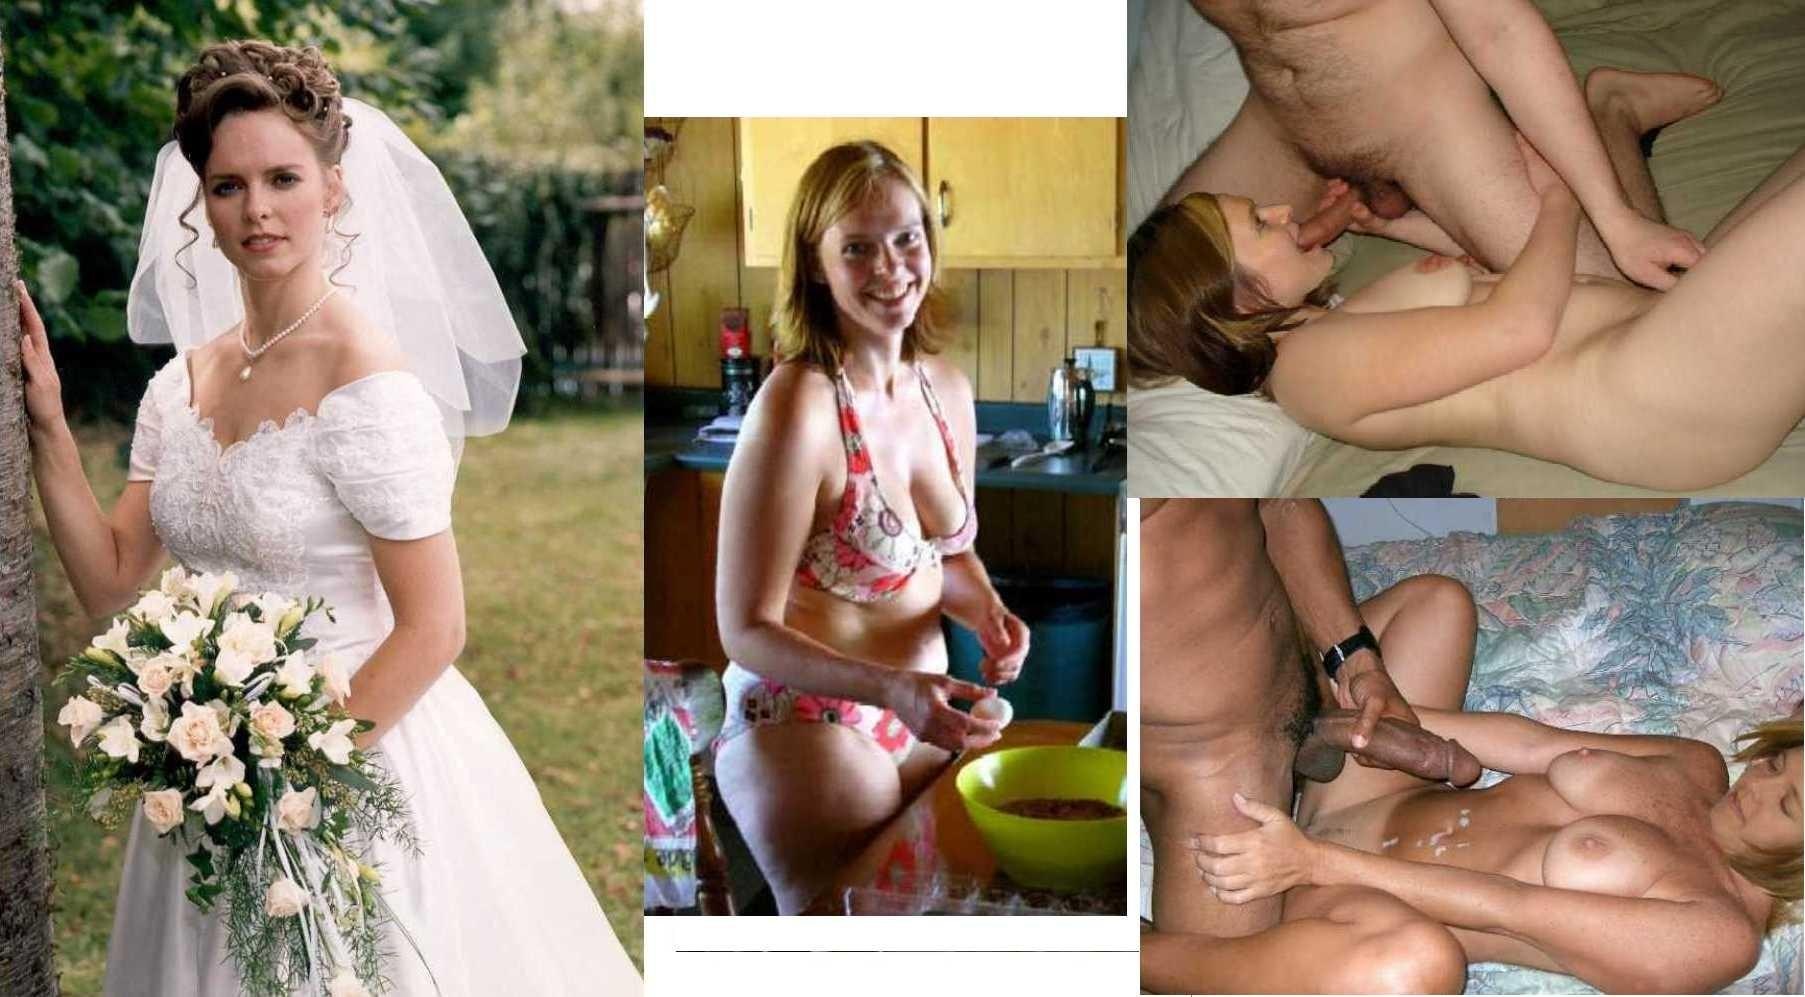 Real Sex with the Bride at the Wedding (55 photos)